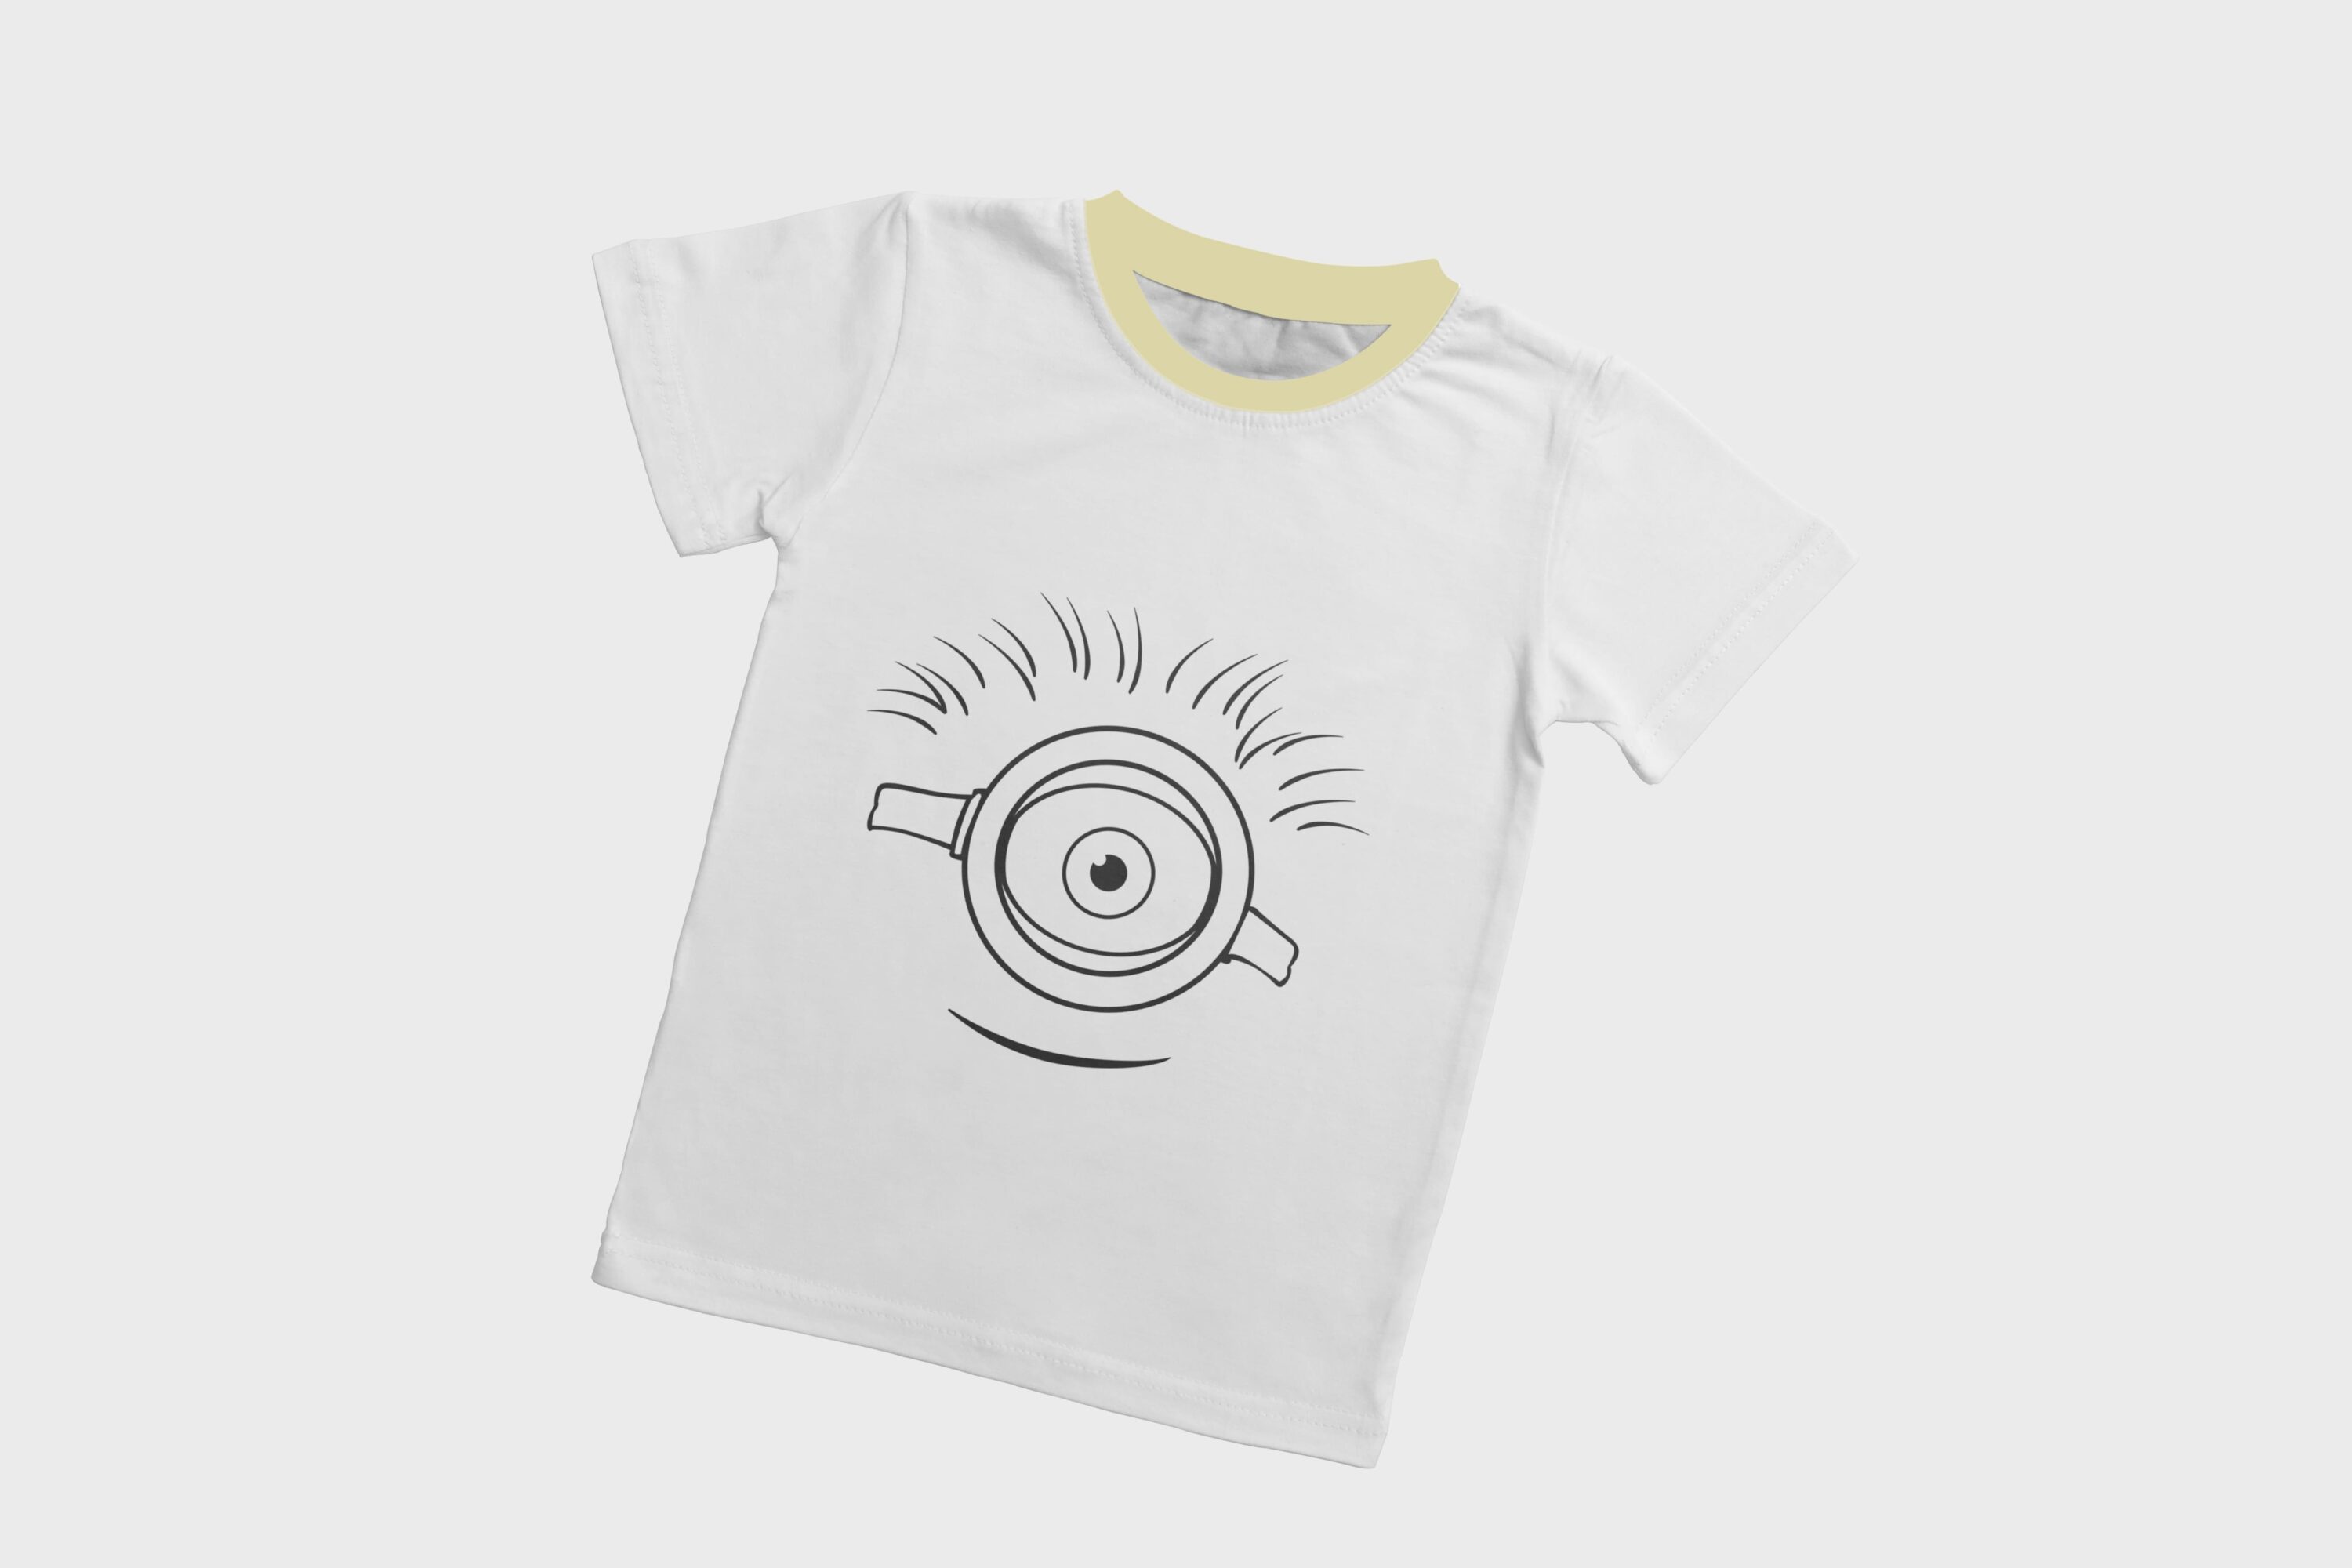 A white T-shirt with a dirty yellow collar and a silhouette face of a smiling minion with one eye.